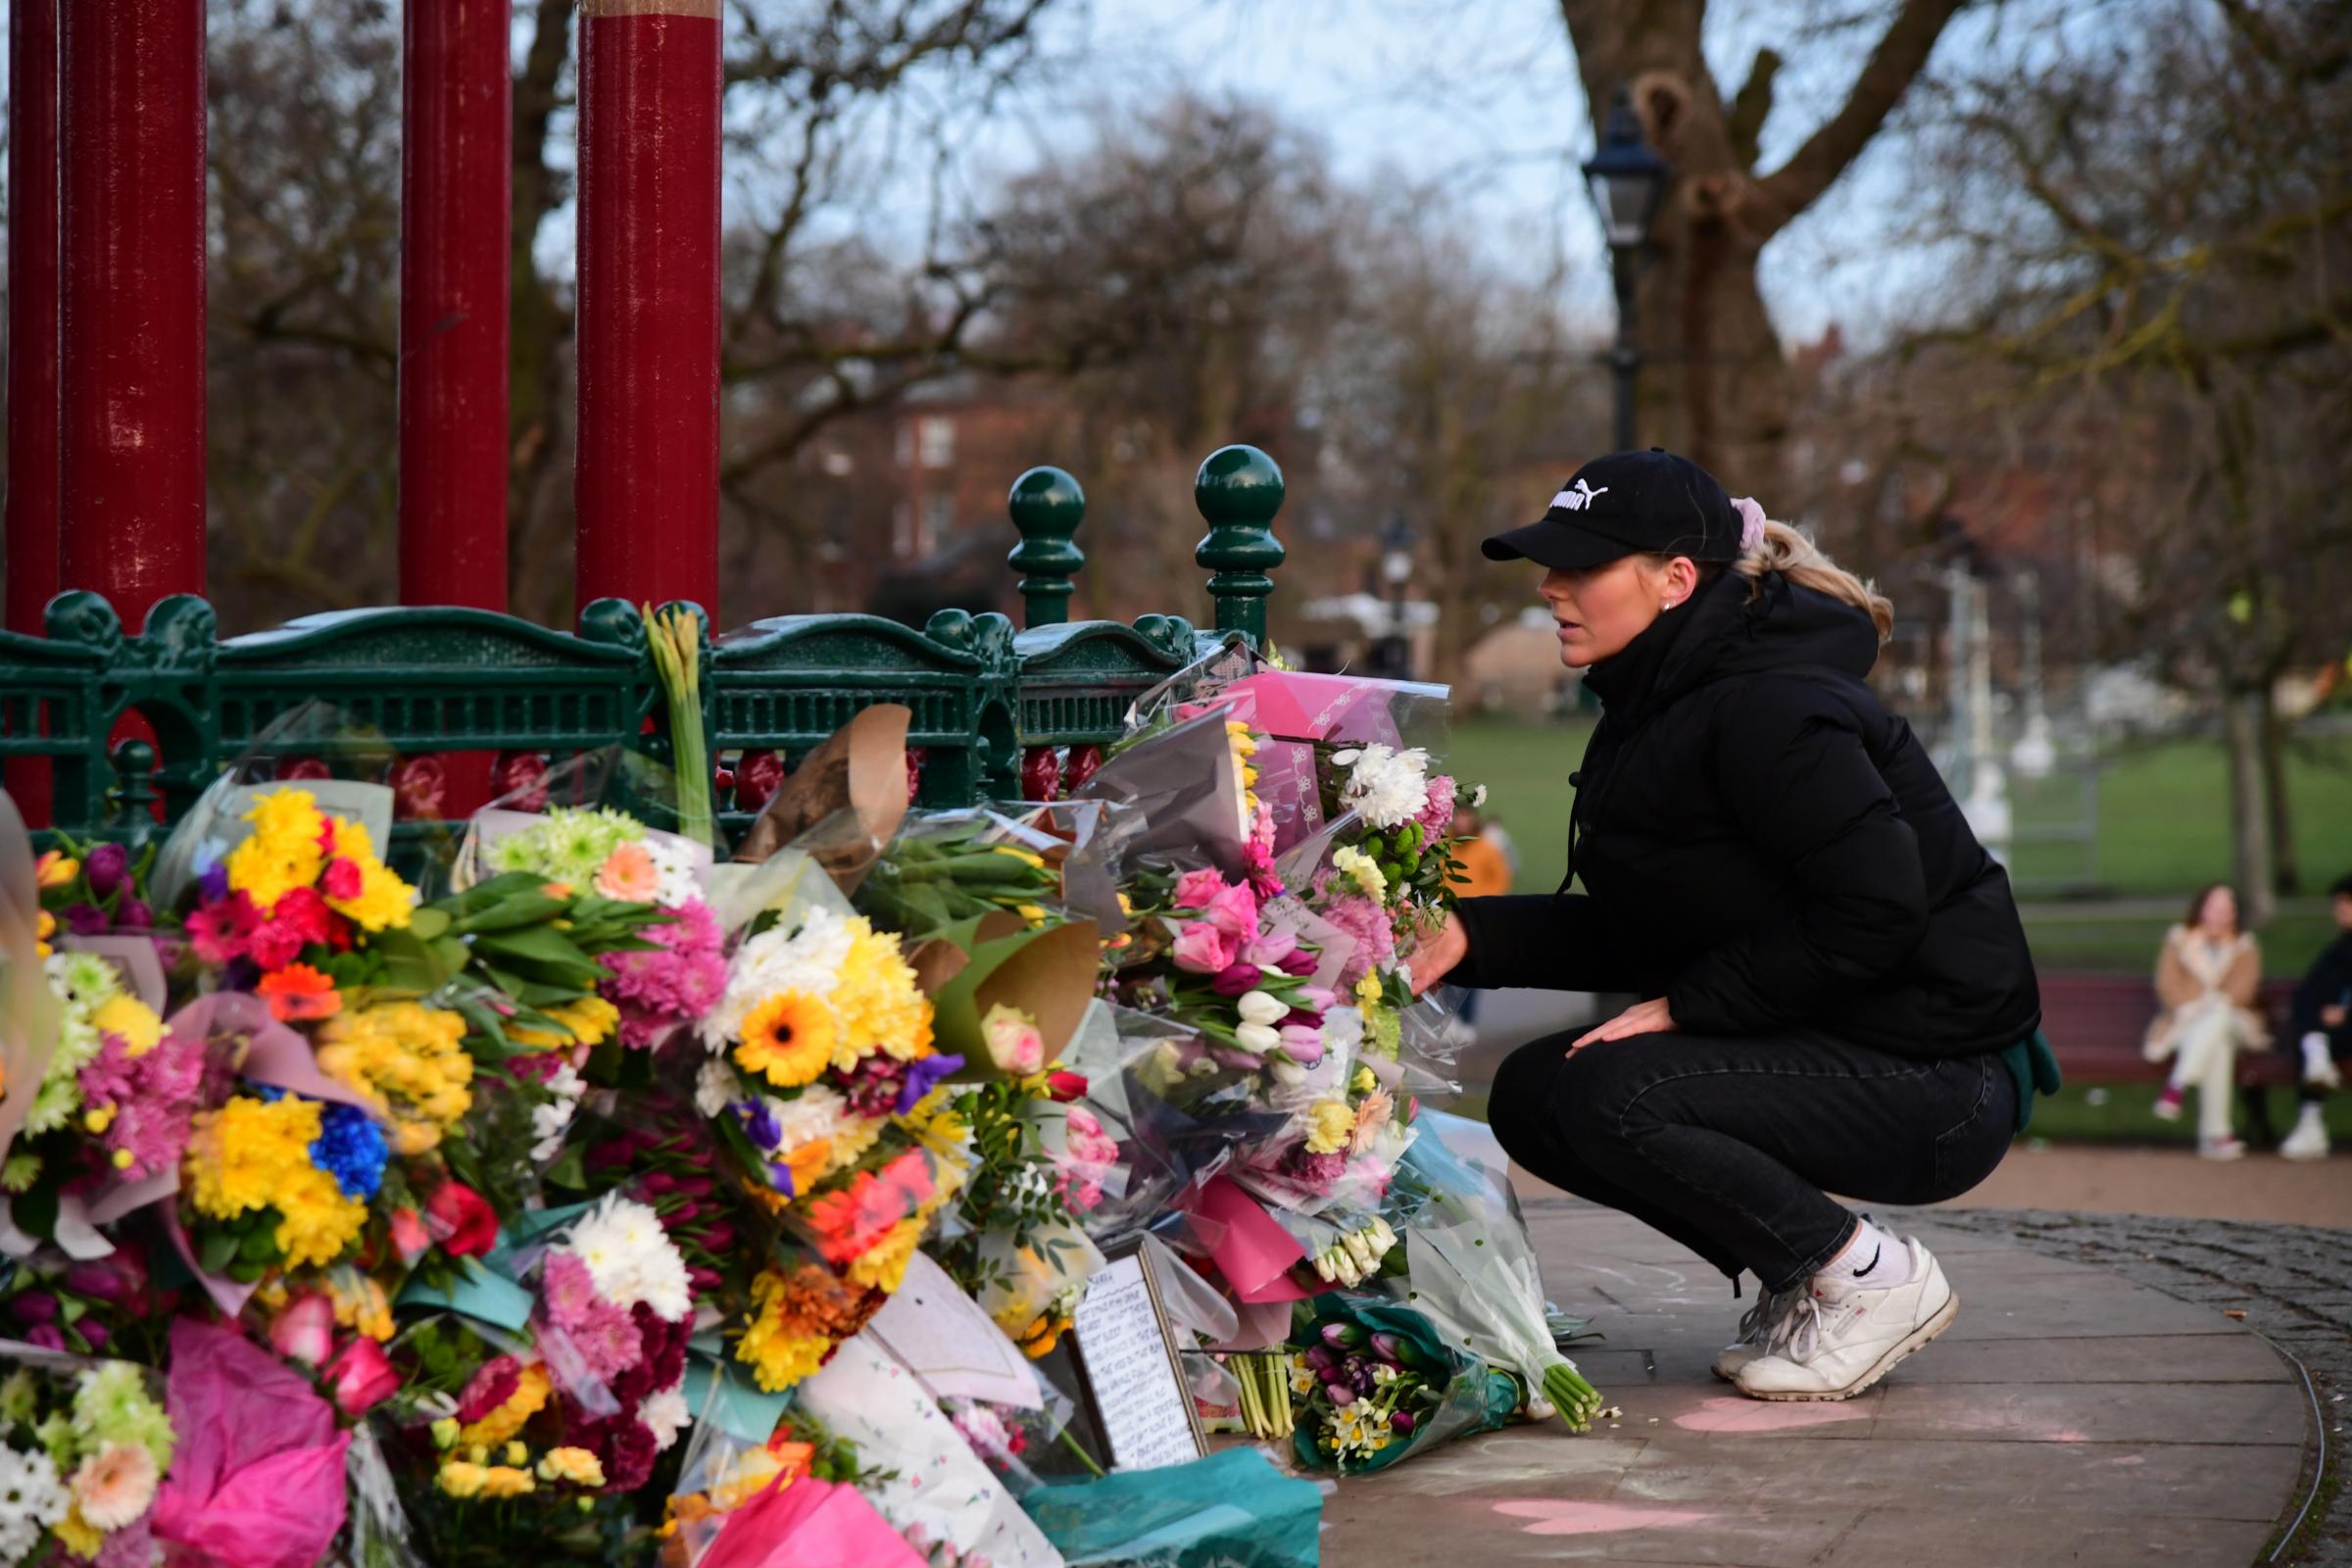 A woman leaves flowers at the bandstand on Clapham Common, after a body found hidden in woodland in Kent has been identified as that of 33-year-old Sarah Everard. A serving Metropolitan Police officer, who is aged in his 40s, remains in custody on